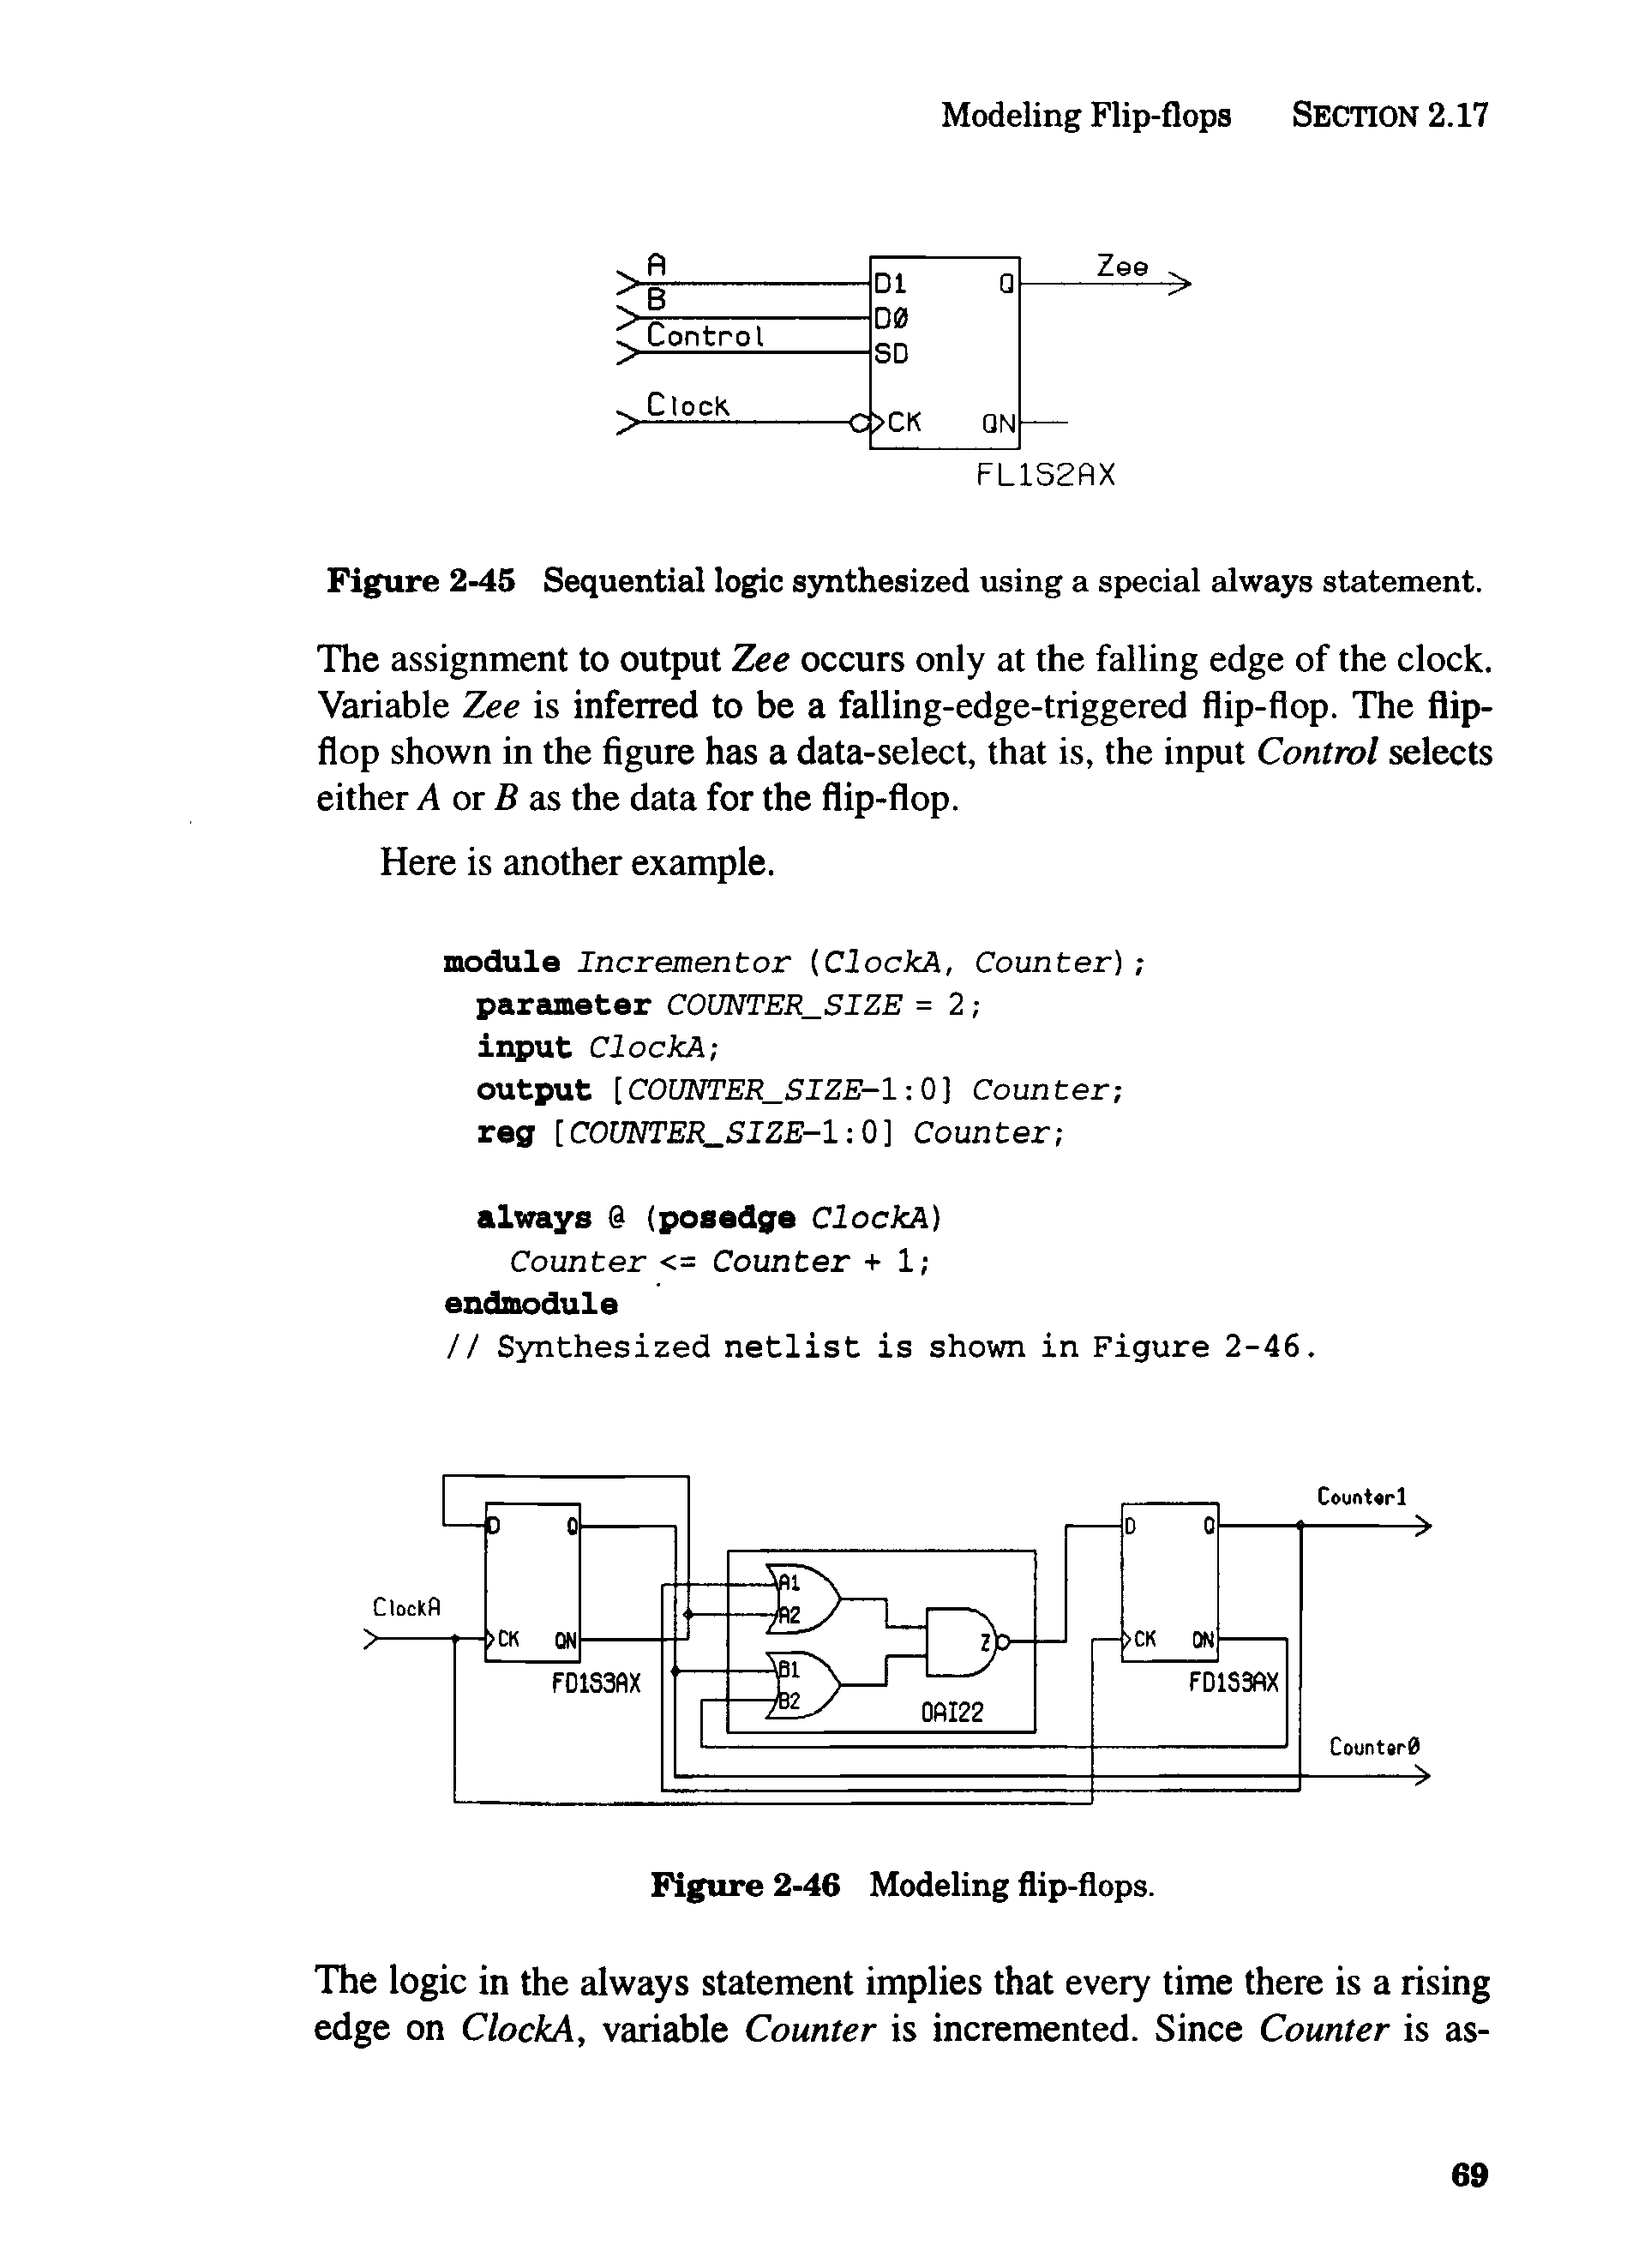 Figure 2-45 Sequential logic synthesized using a special always statement.